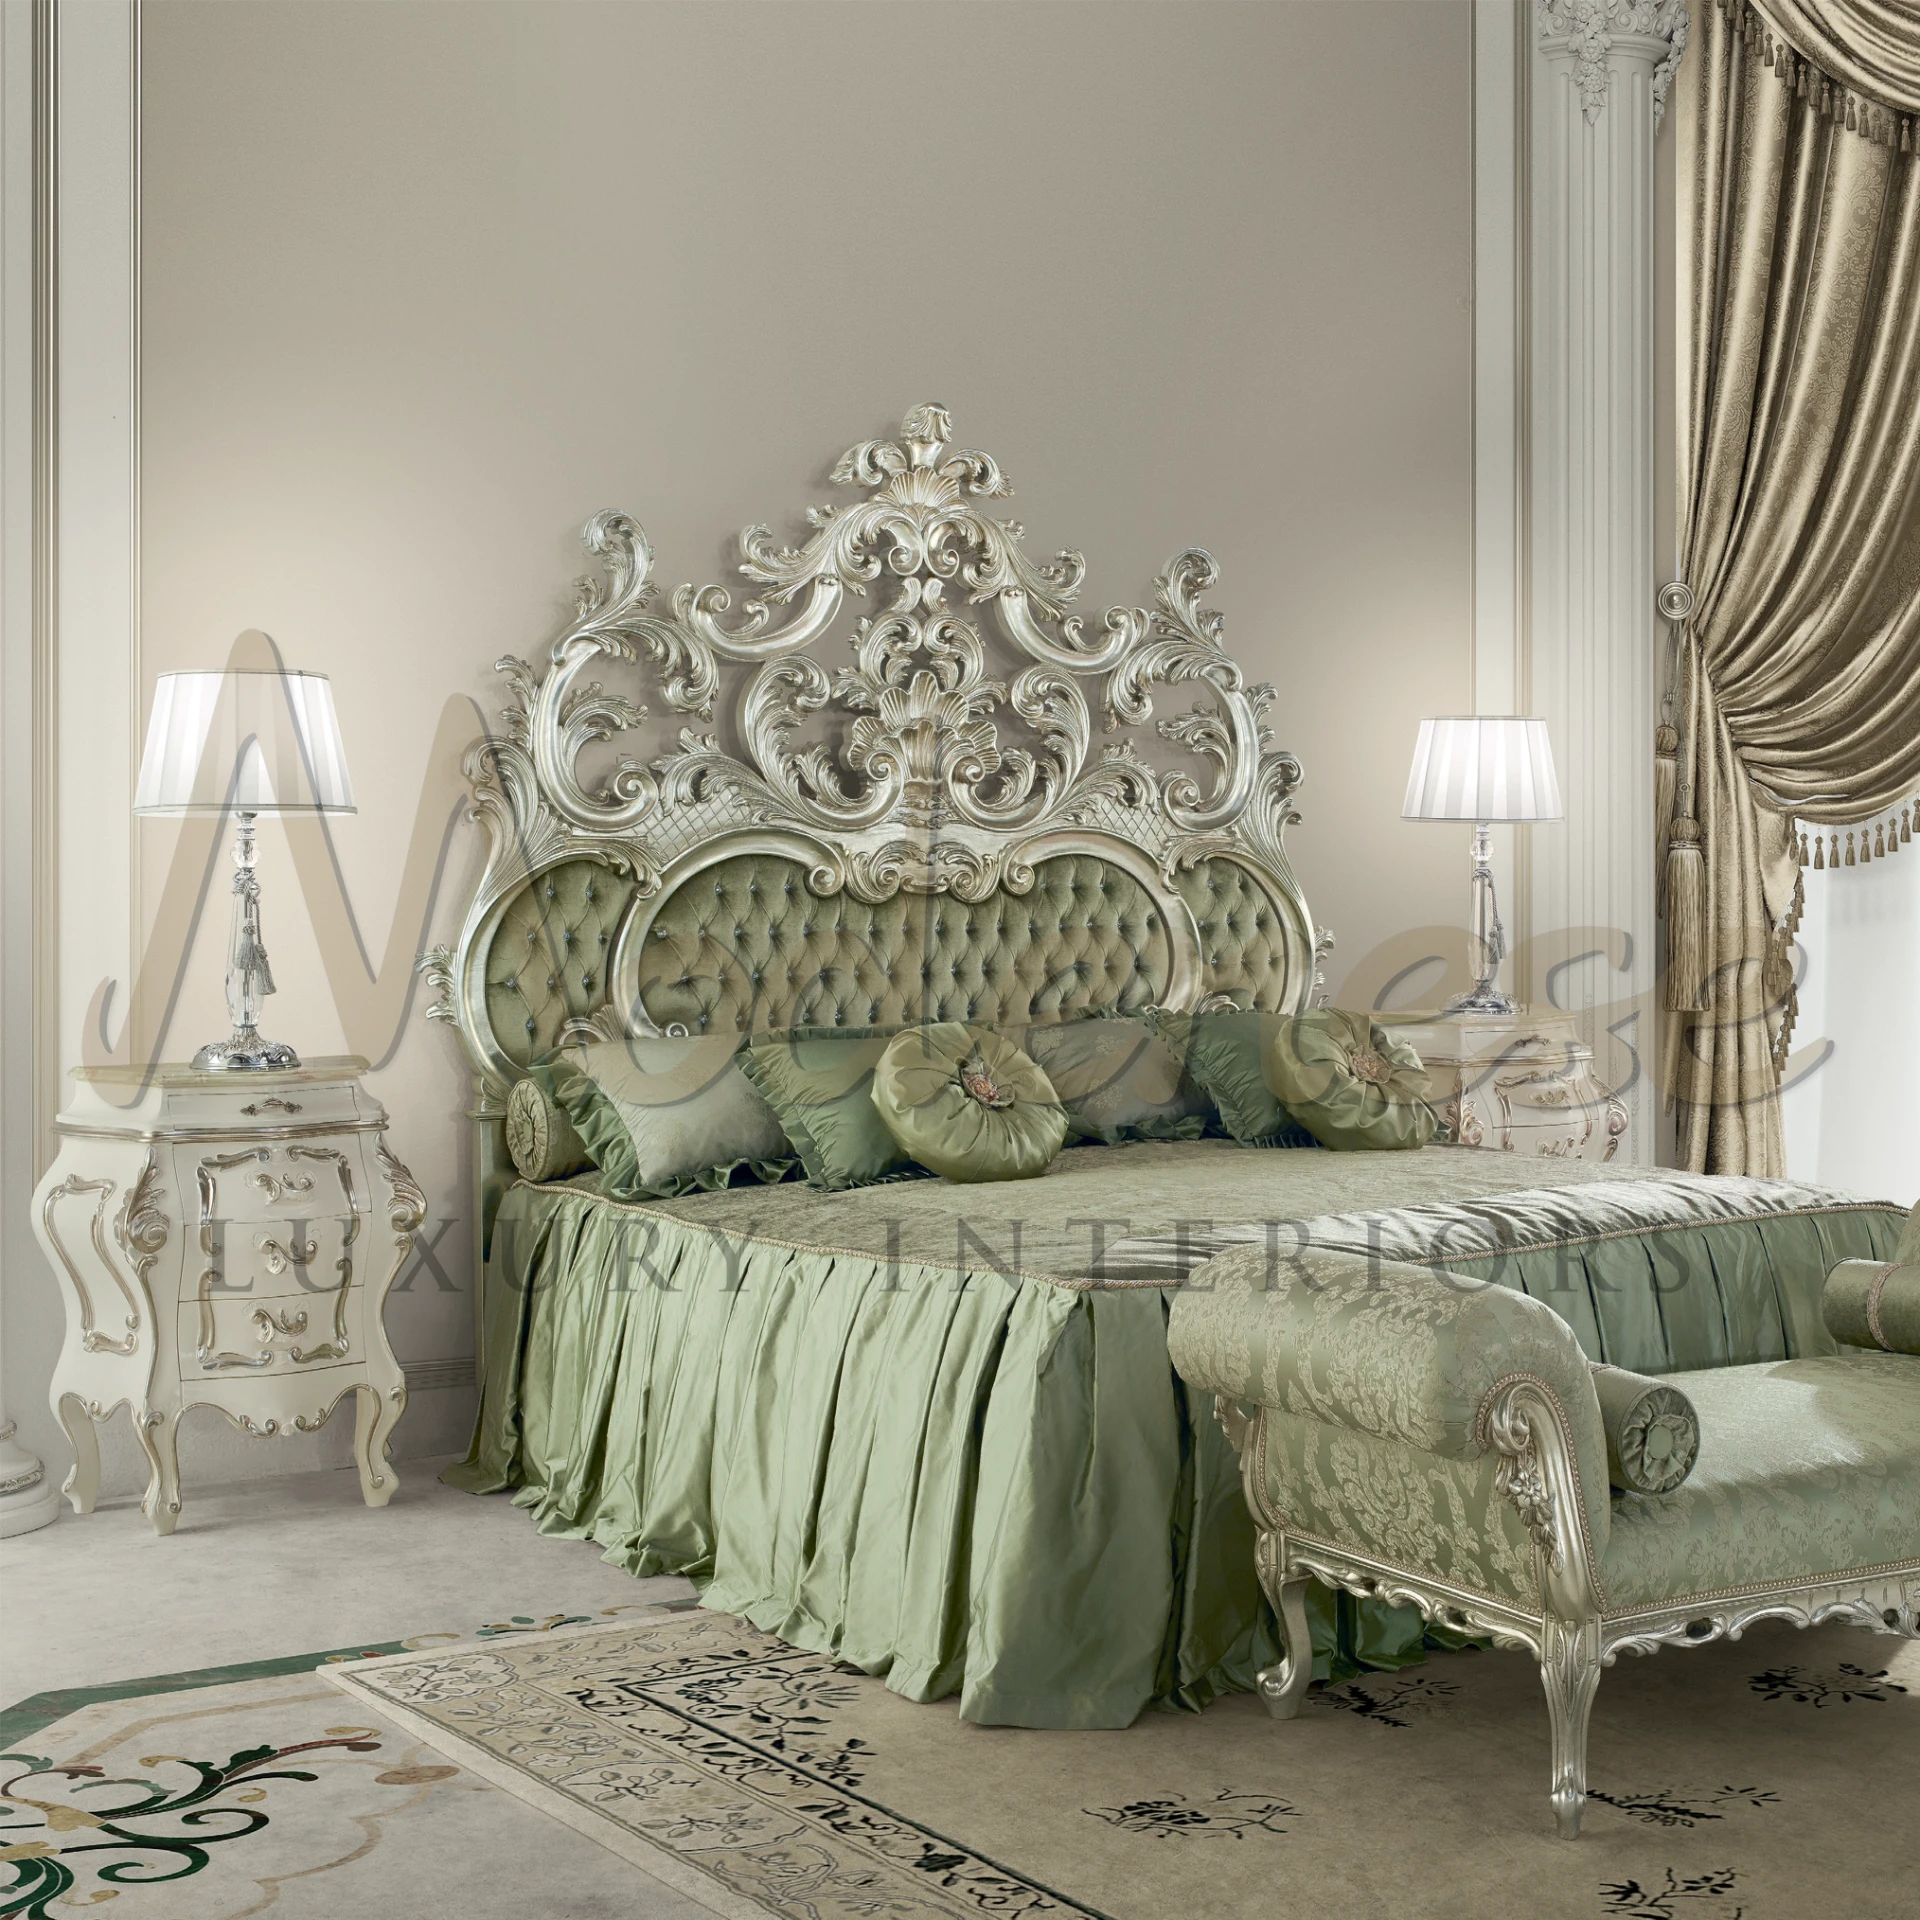 Classic bed featuring the Victorian Round Pillow, exuding a sense of refined beauty and timeless charm in bedroom decor.